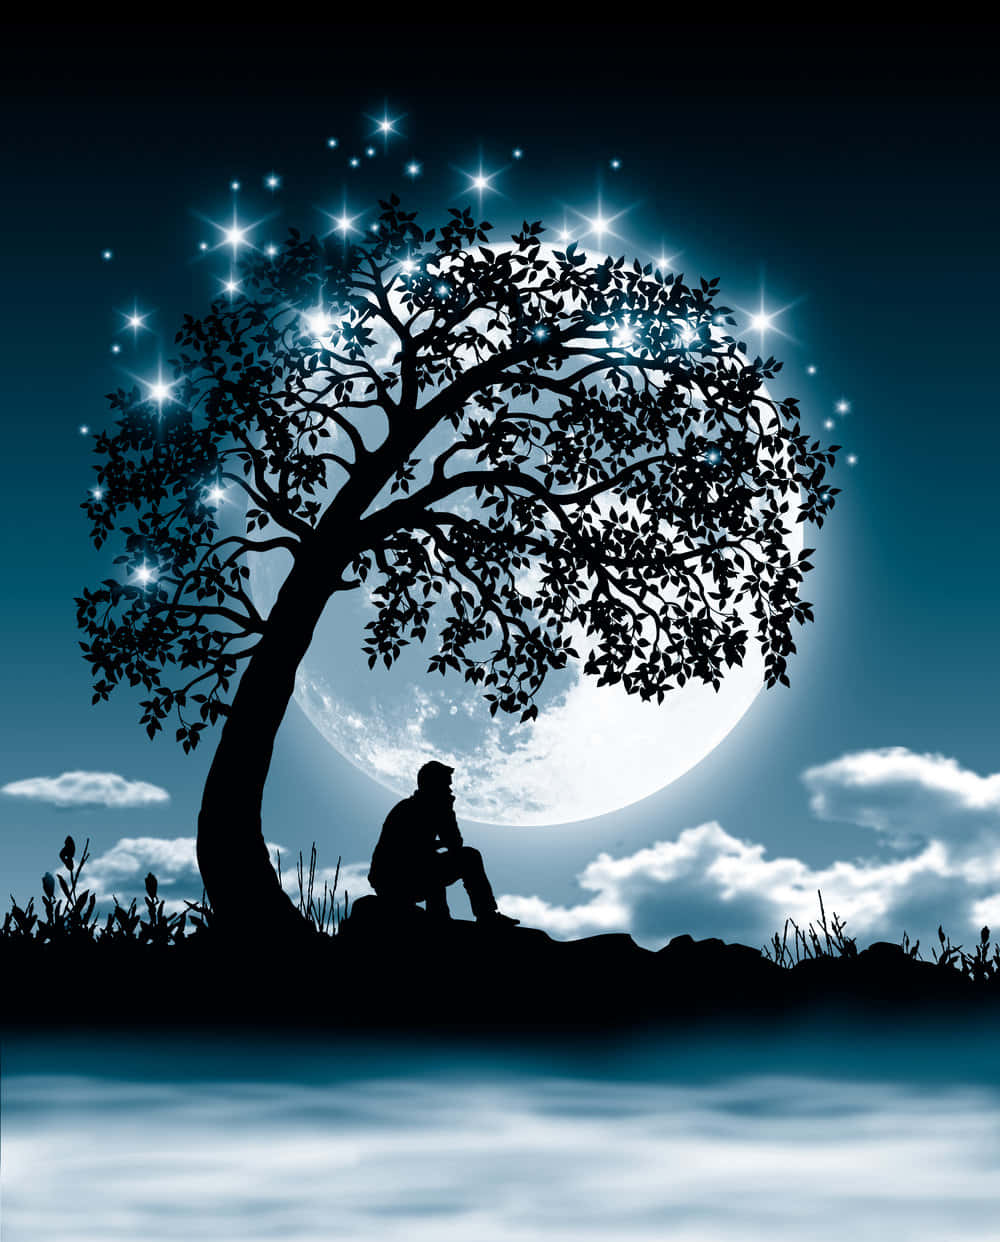 A Man Sitting Under A Tree With The Moon Behind Him